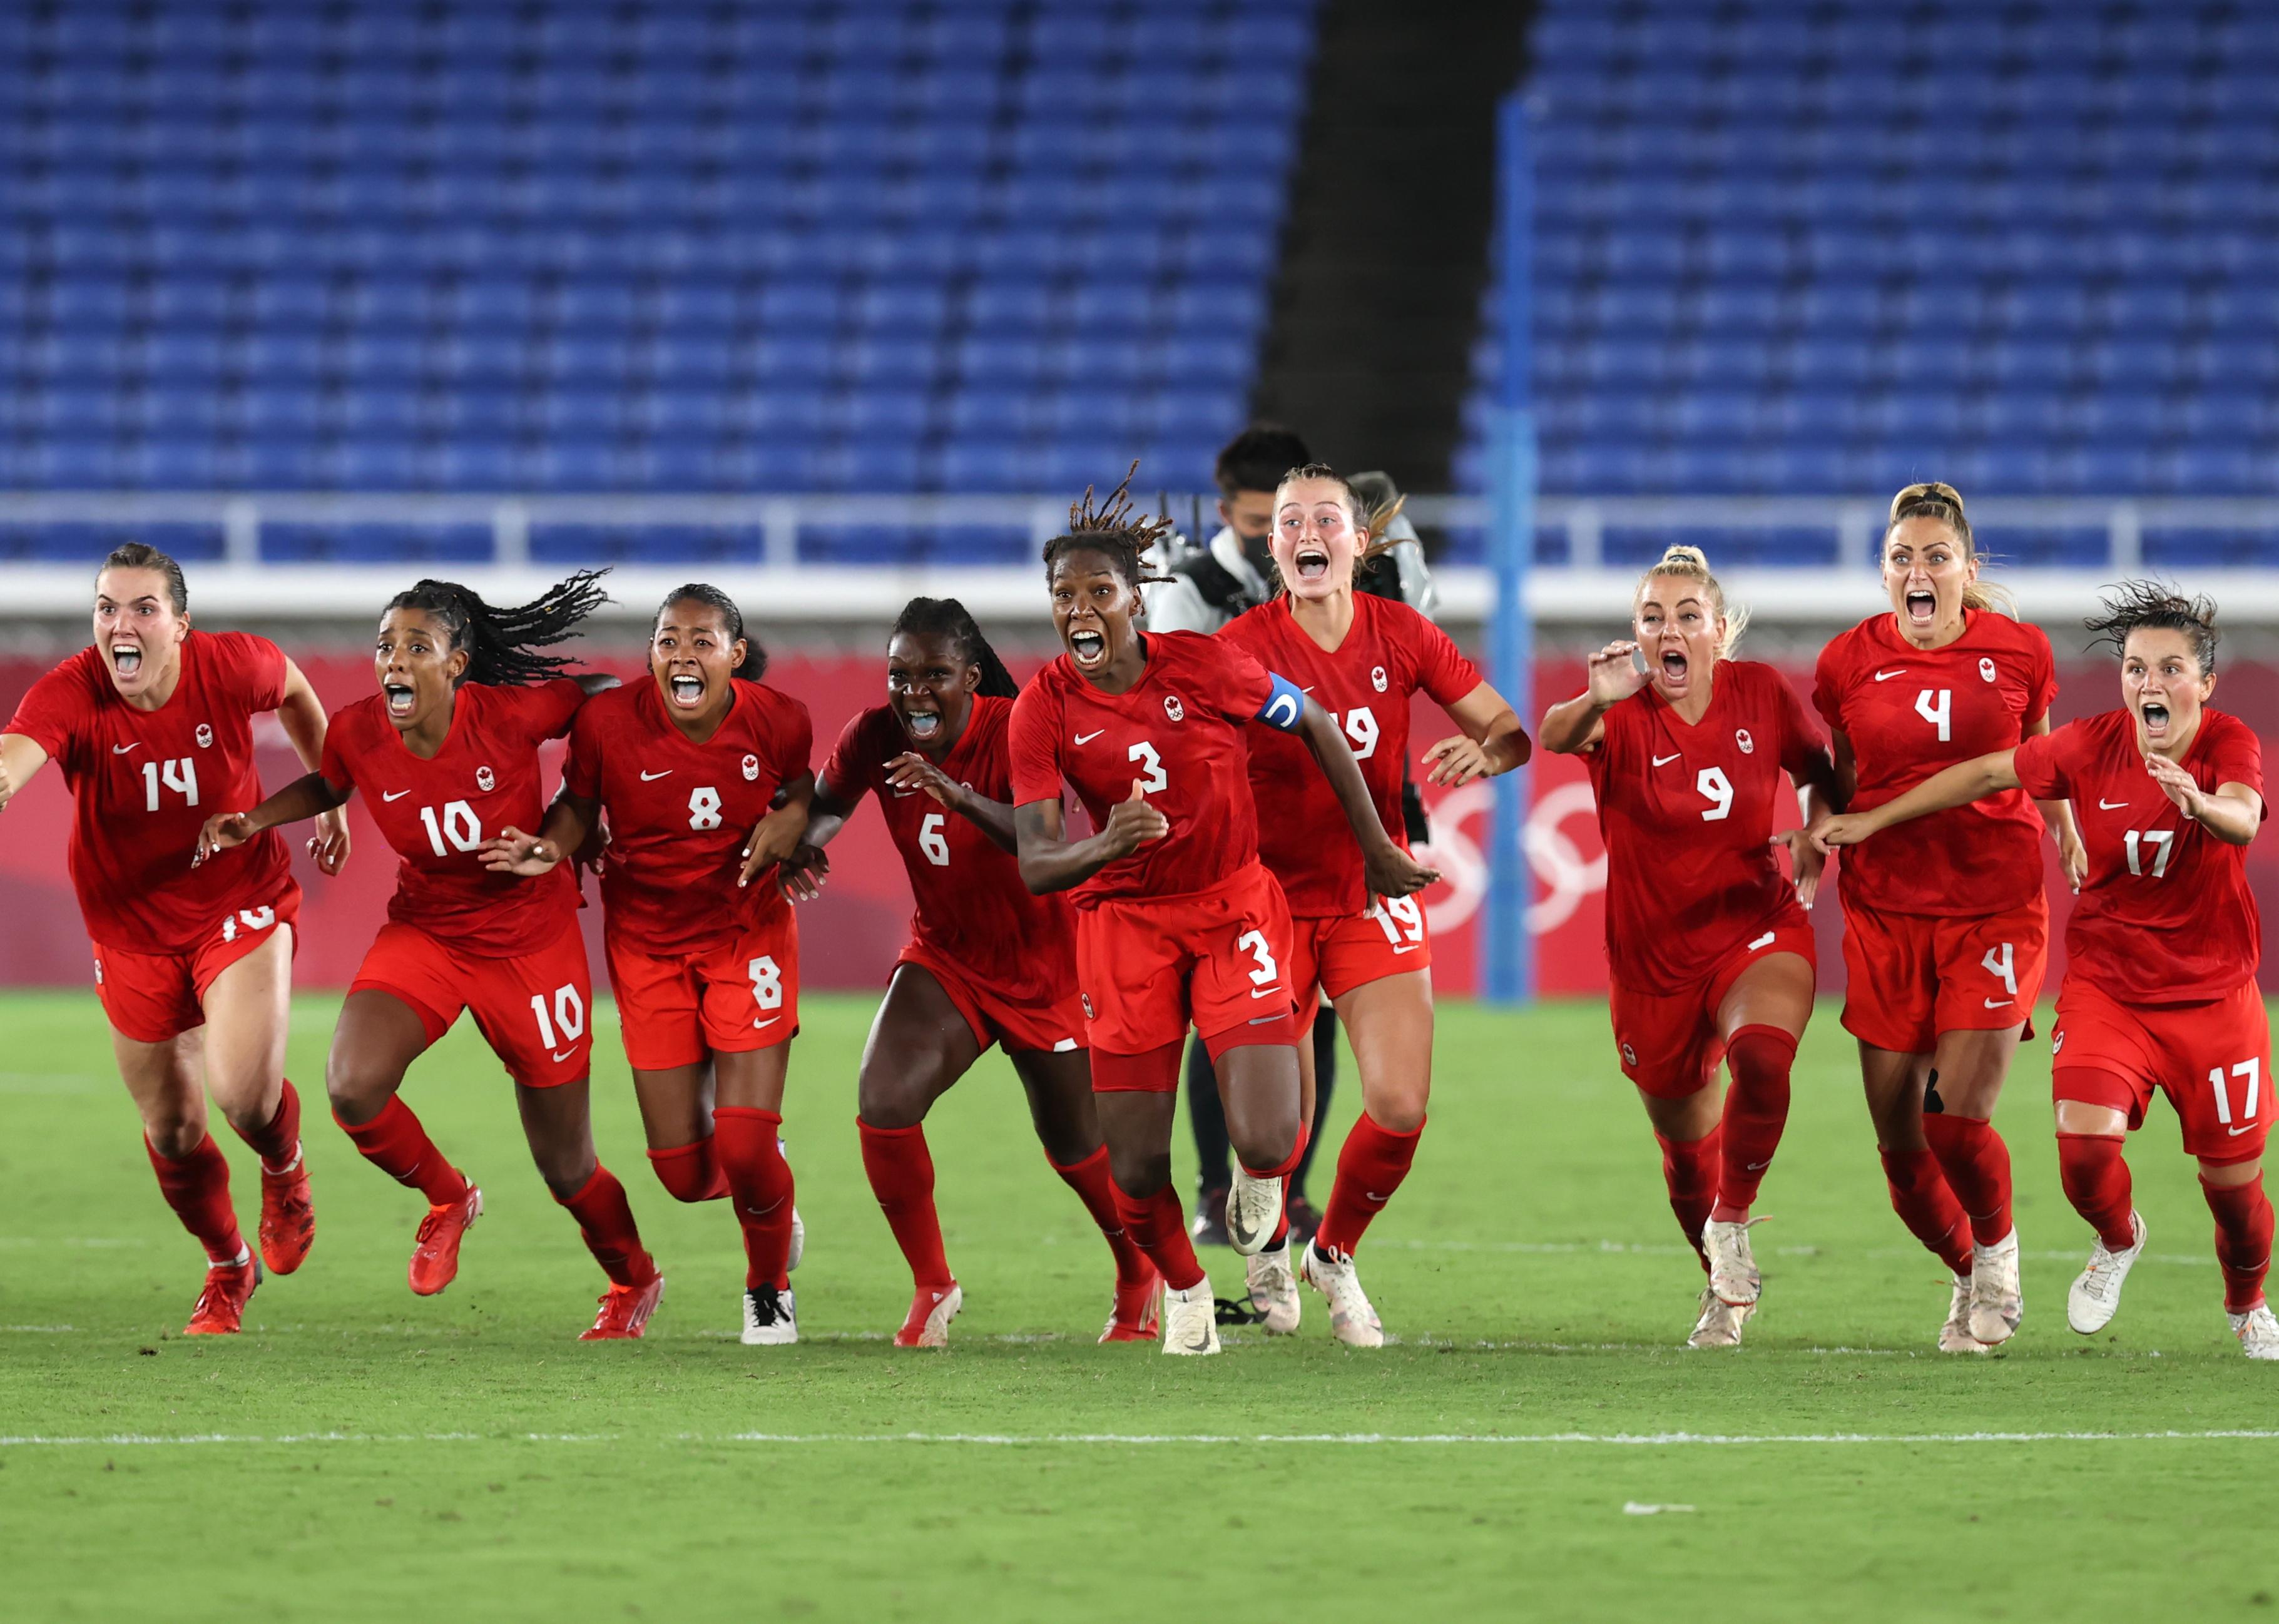 Kadeisha Buchanan of Team Canada and teammates run to celebrate the winning penalty in the shootout during the Women's Gold Medal Match.